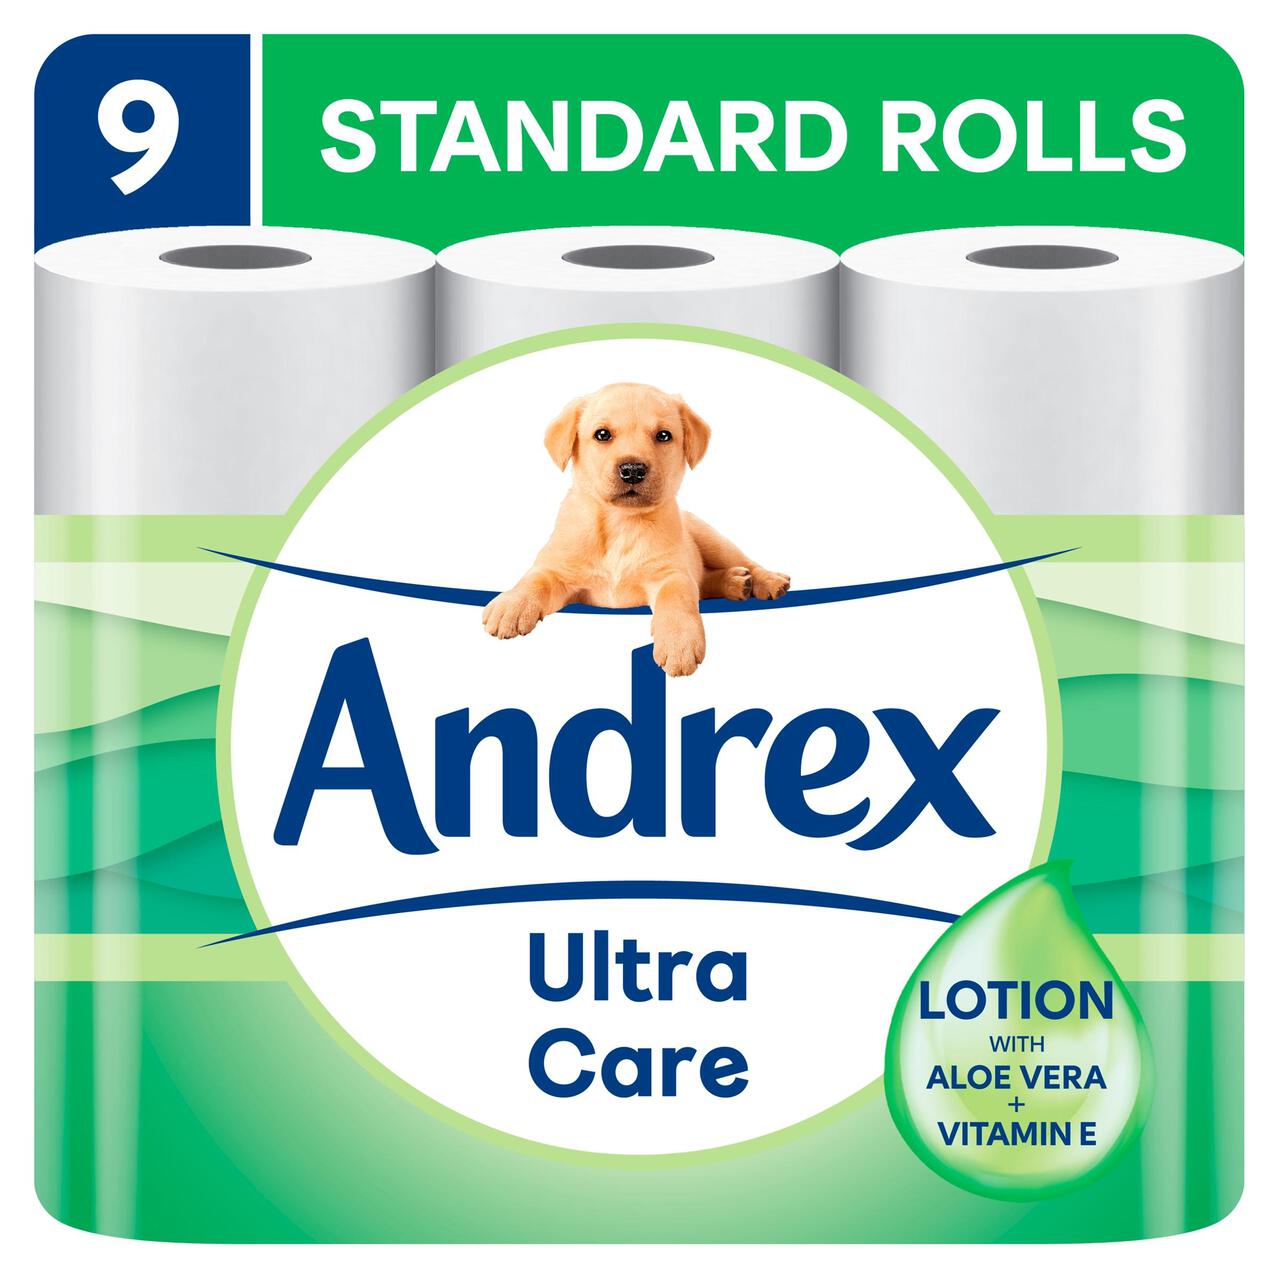 Andrex Ultra Care Toilet Roll 9 per pack